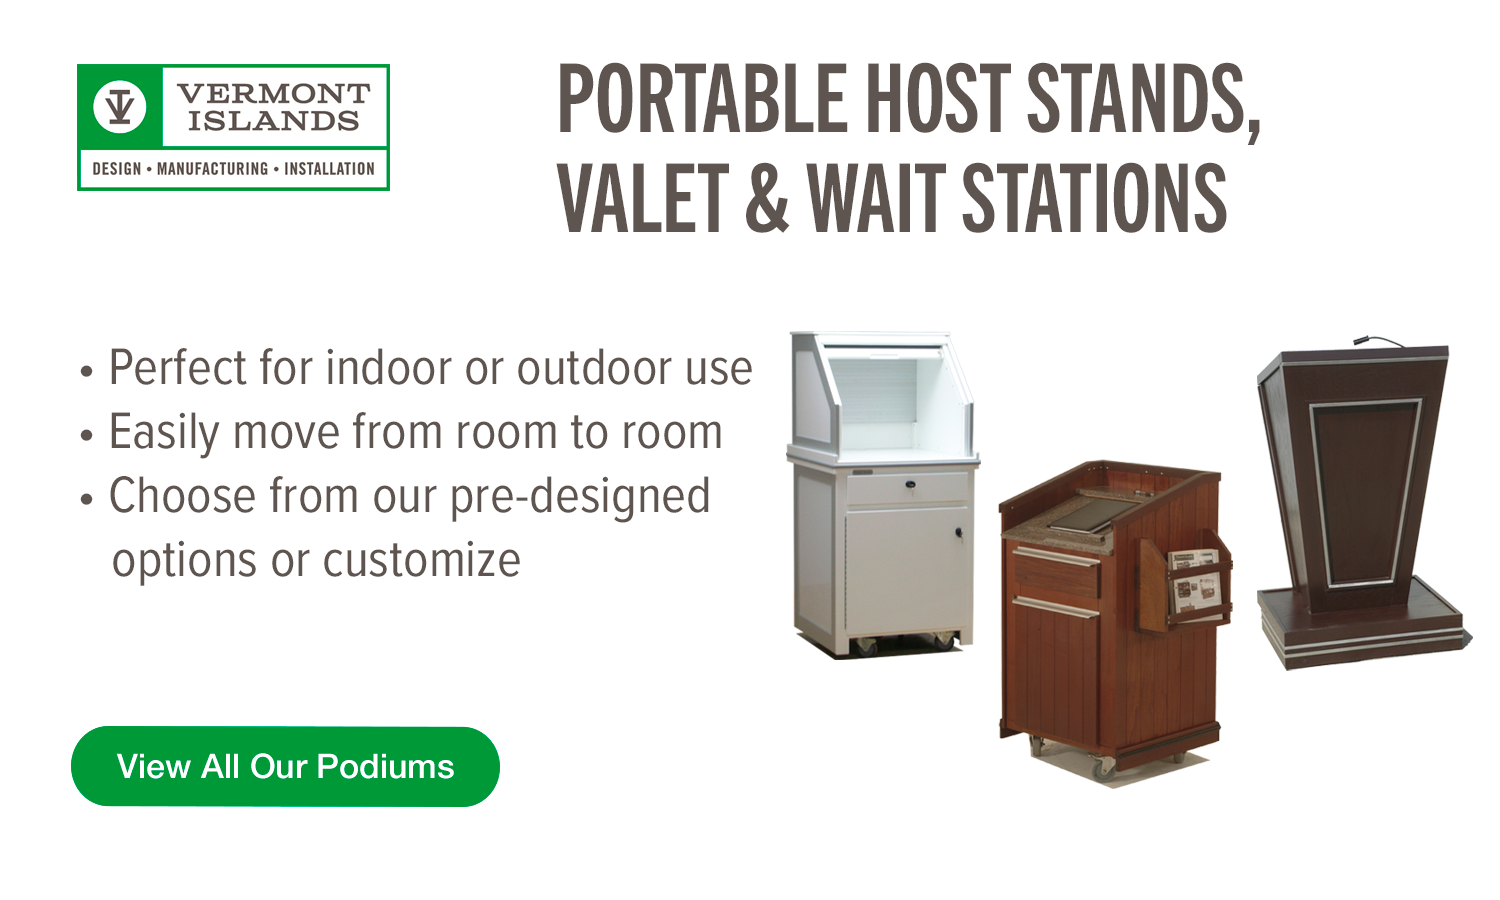 Portable Podiums and Host Stands